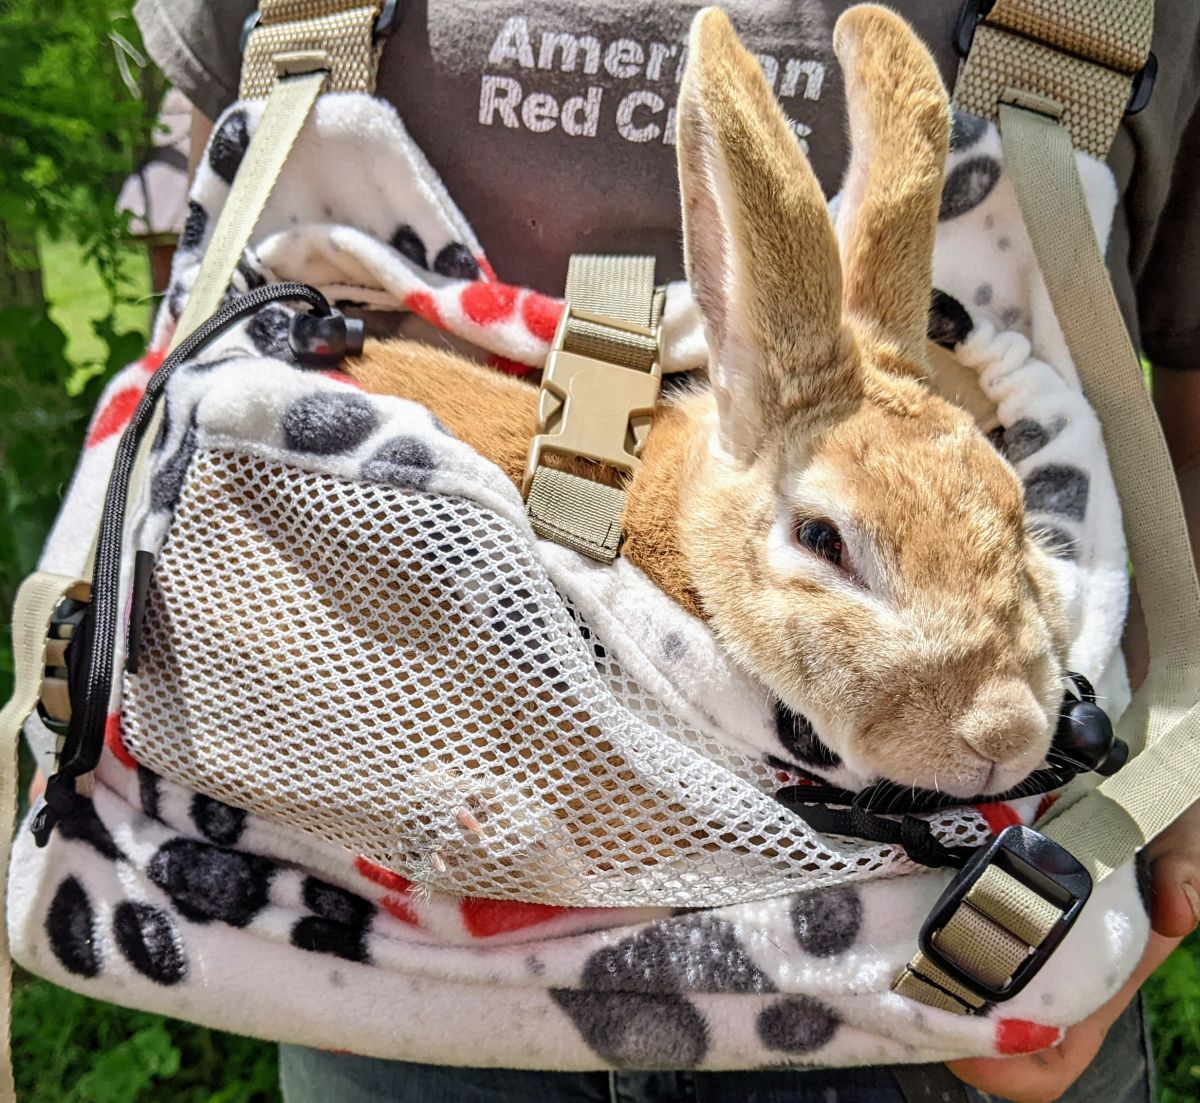 Bunny in carrier